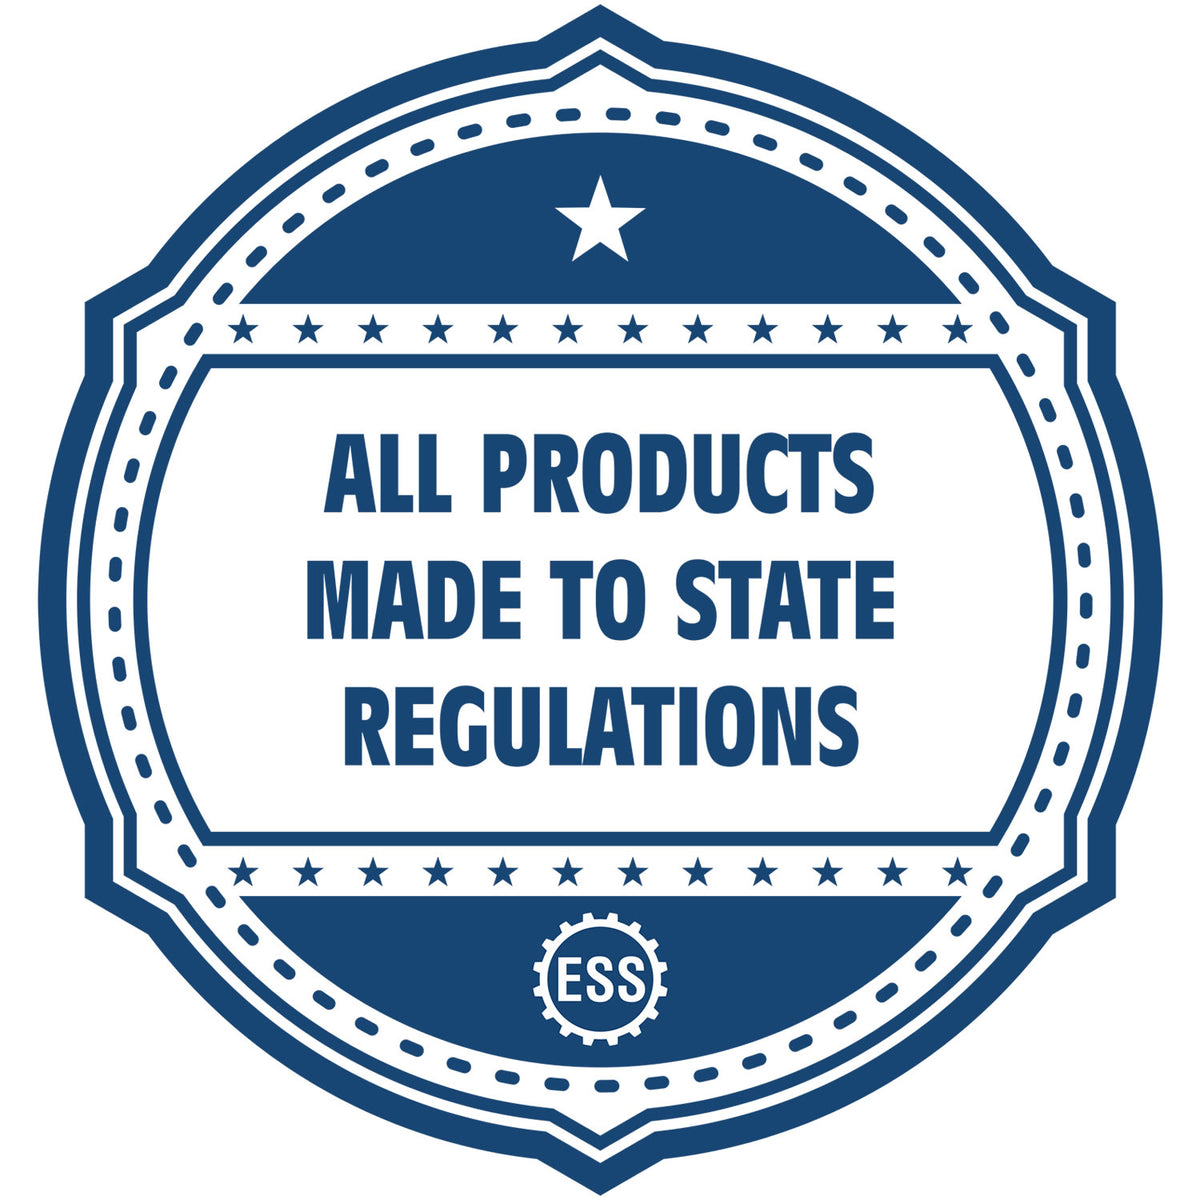 A blue icon or badge for the Gift Maine Architect Seal showing that this product is made in compliance with state regulations.